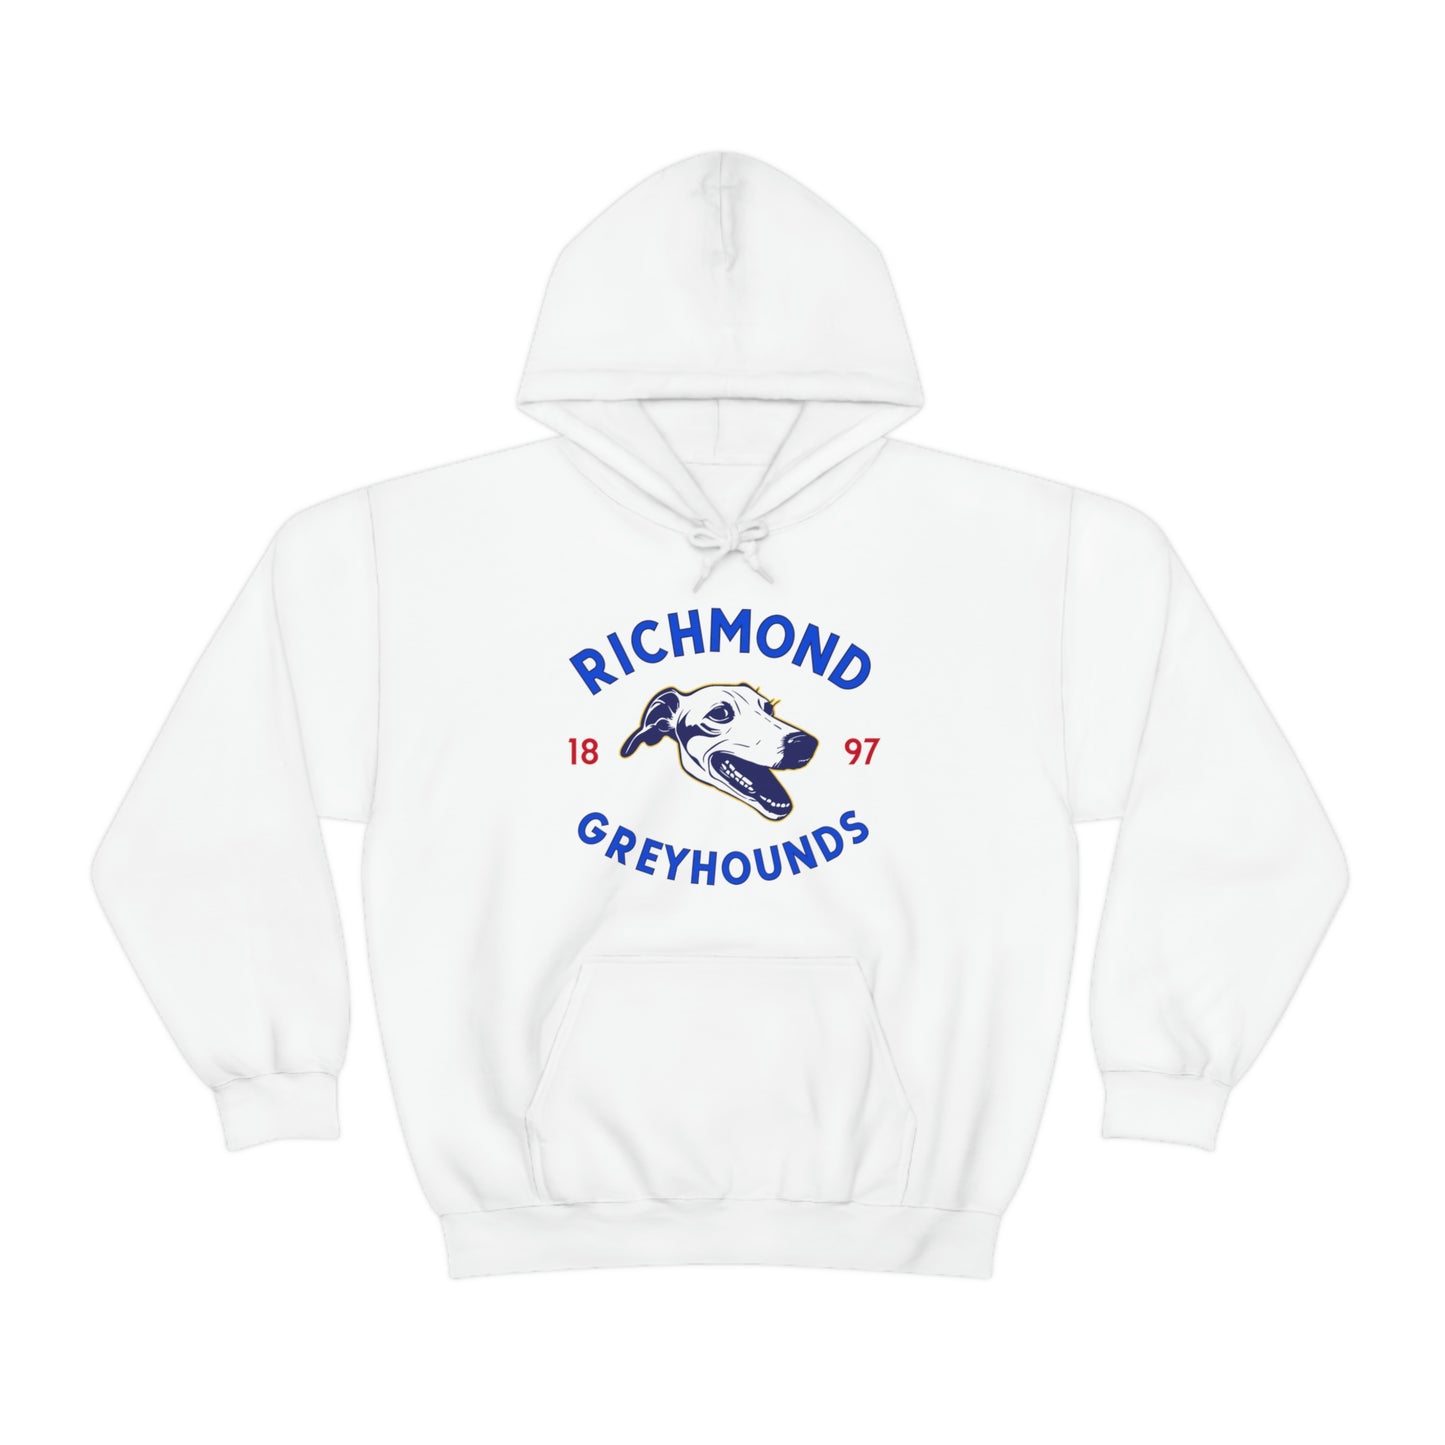 AFC Richmond Greyhounds Ted Lasso Hoodie